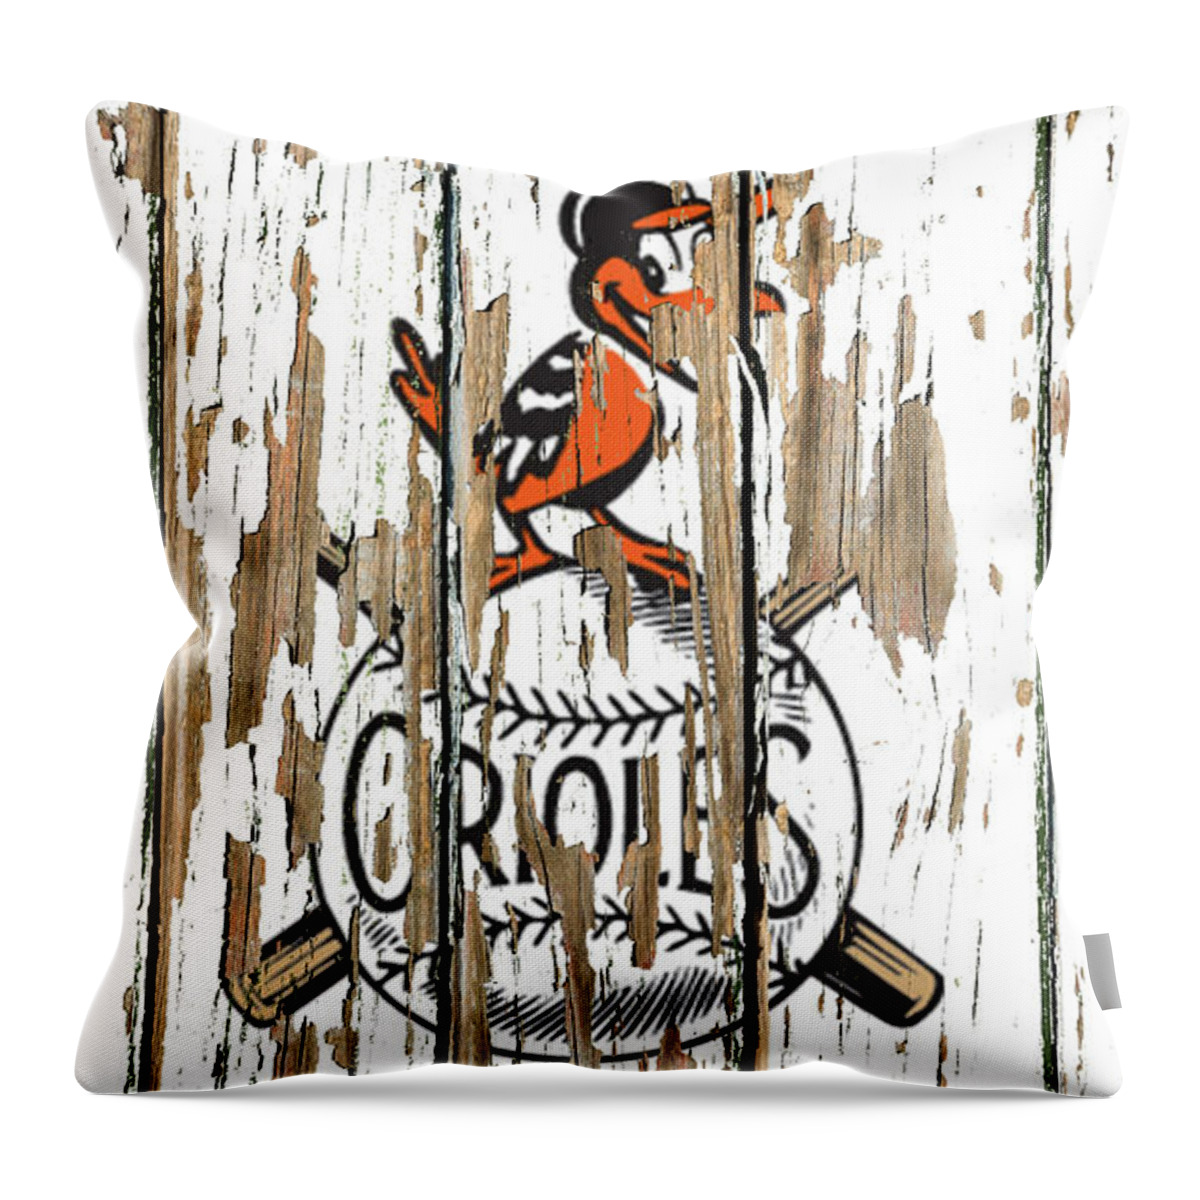 Baltimore Orioles Throw Pillow featuring the mixed media Baltimore Orioles Vintage Logo on White Peeling Barn Wood Paint by Design Turnpike